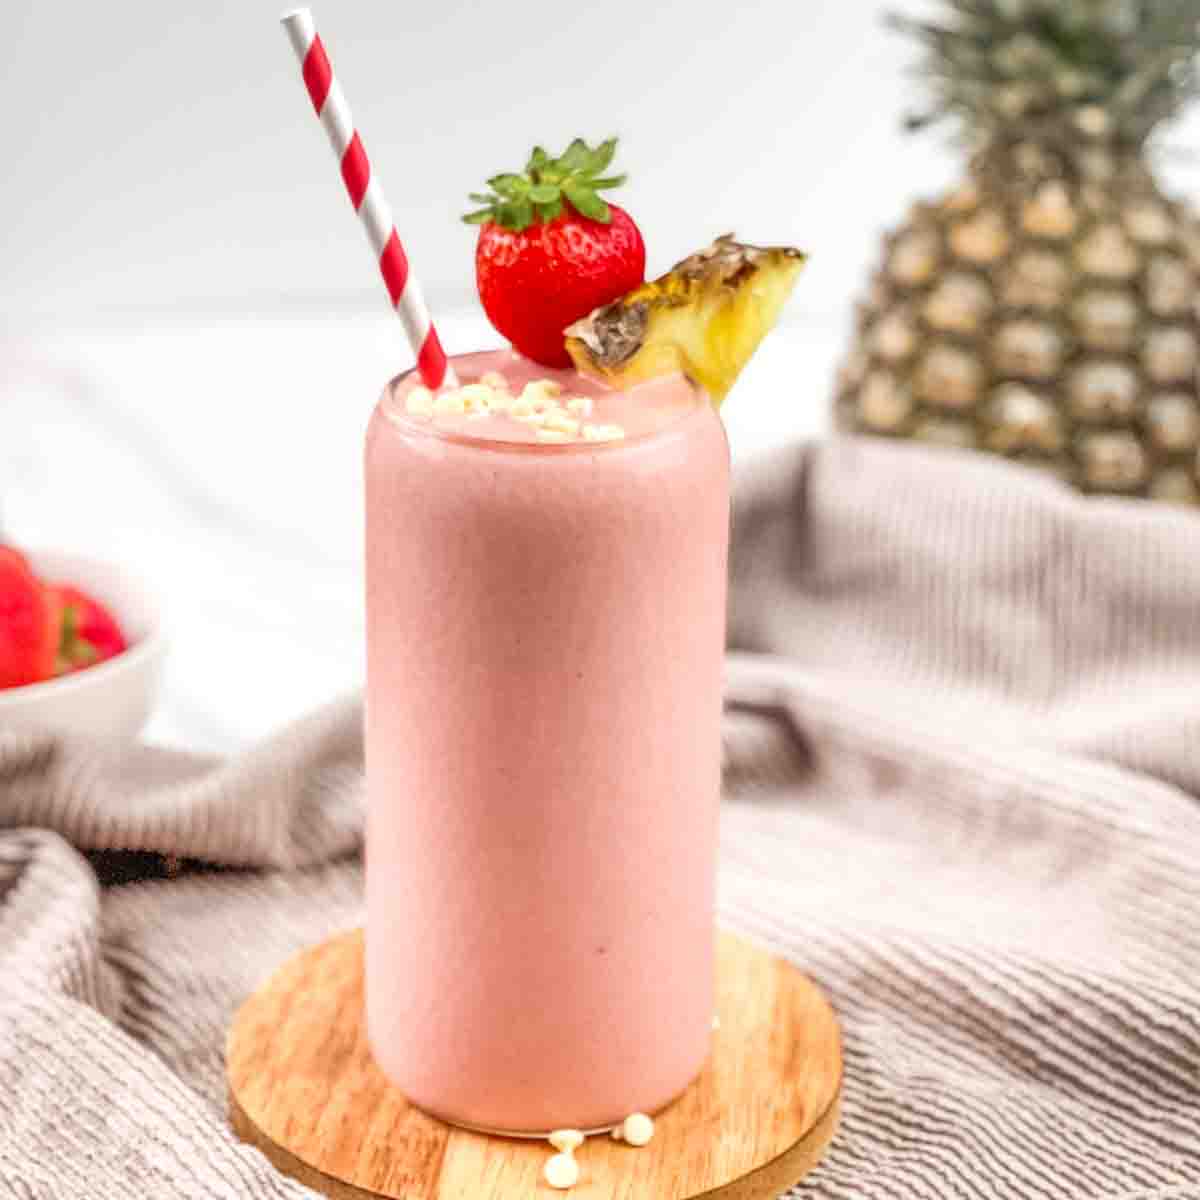 A tall glass of Bahama Mama tropical smoothie garnished with a whole strawberry, pineapple wedge, white chocolate chips, and a red and white striped straw.